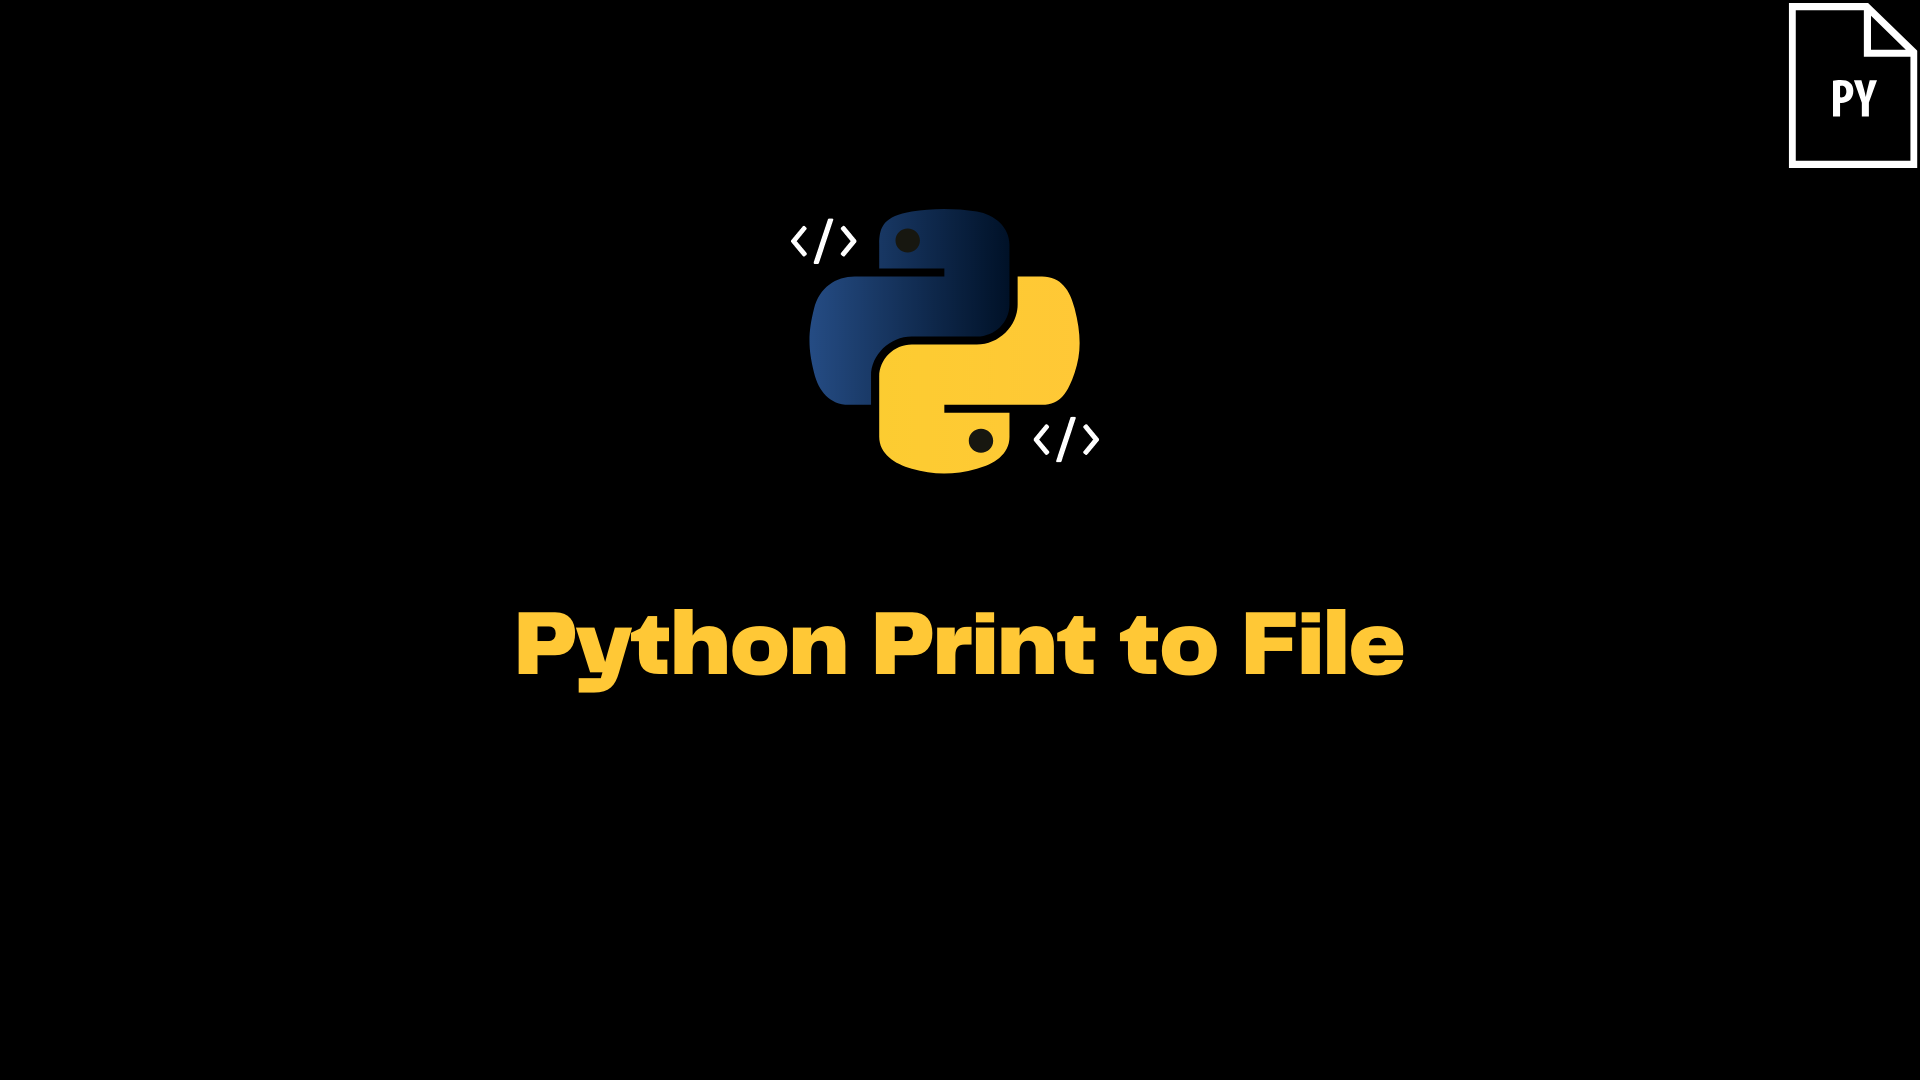 ItsMyCode: Python Print to File